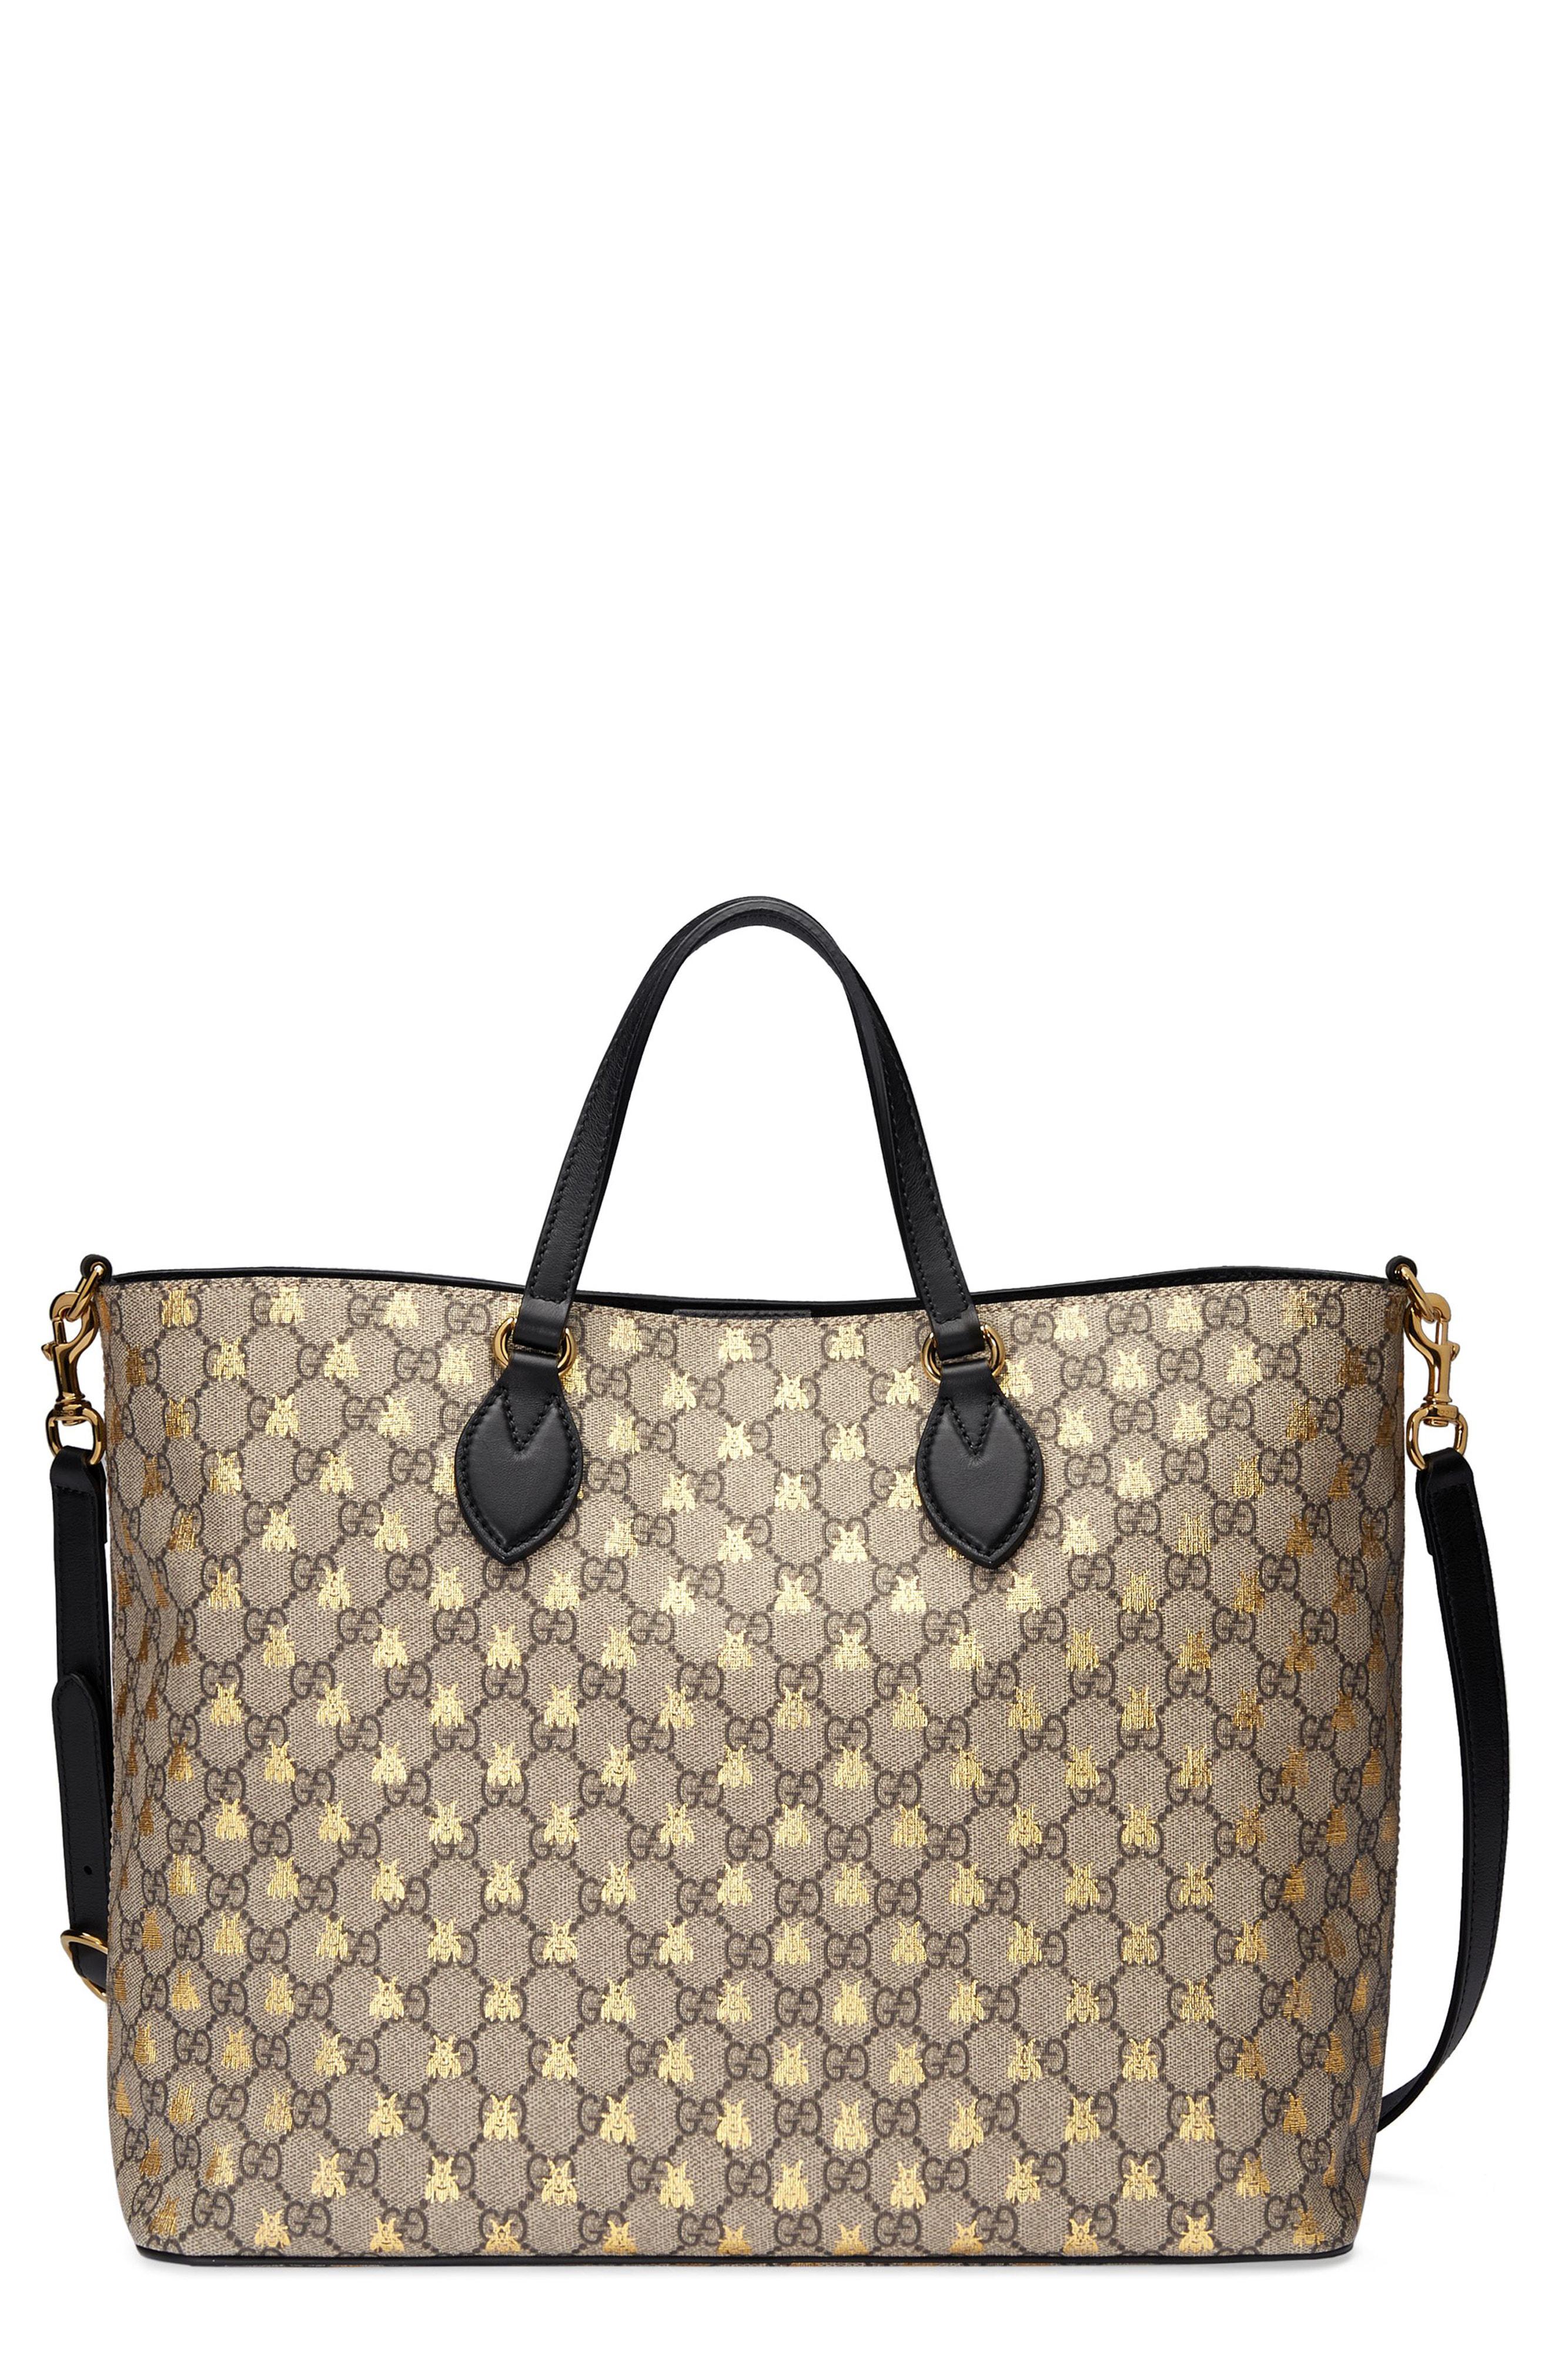 Gucci Bee Gg Supreme Canvas Tote in Natural | Lyst